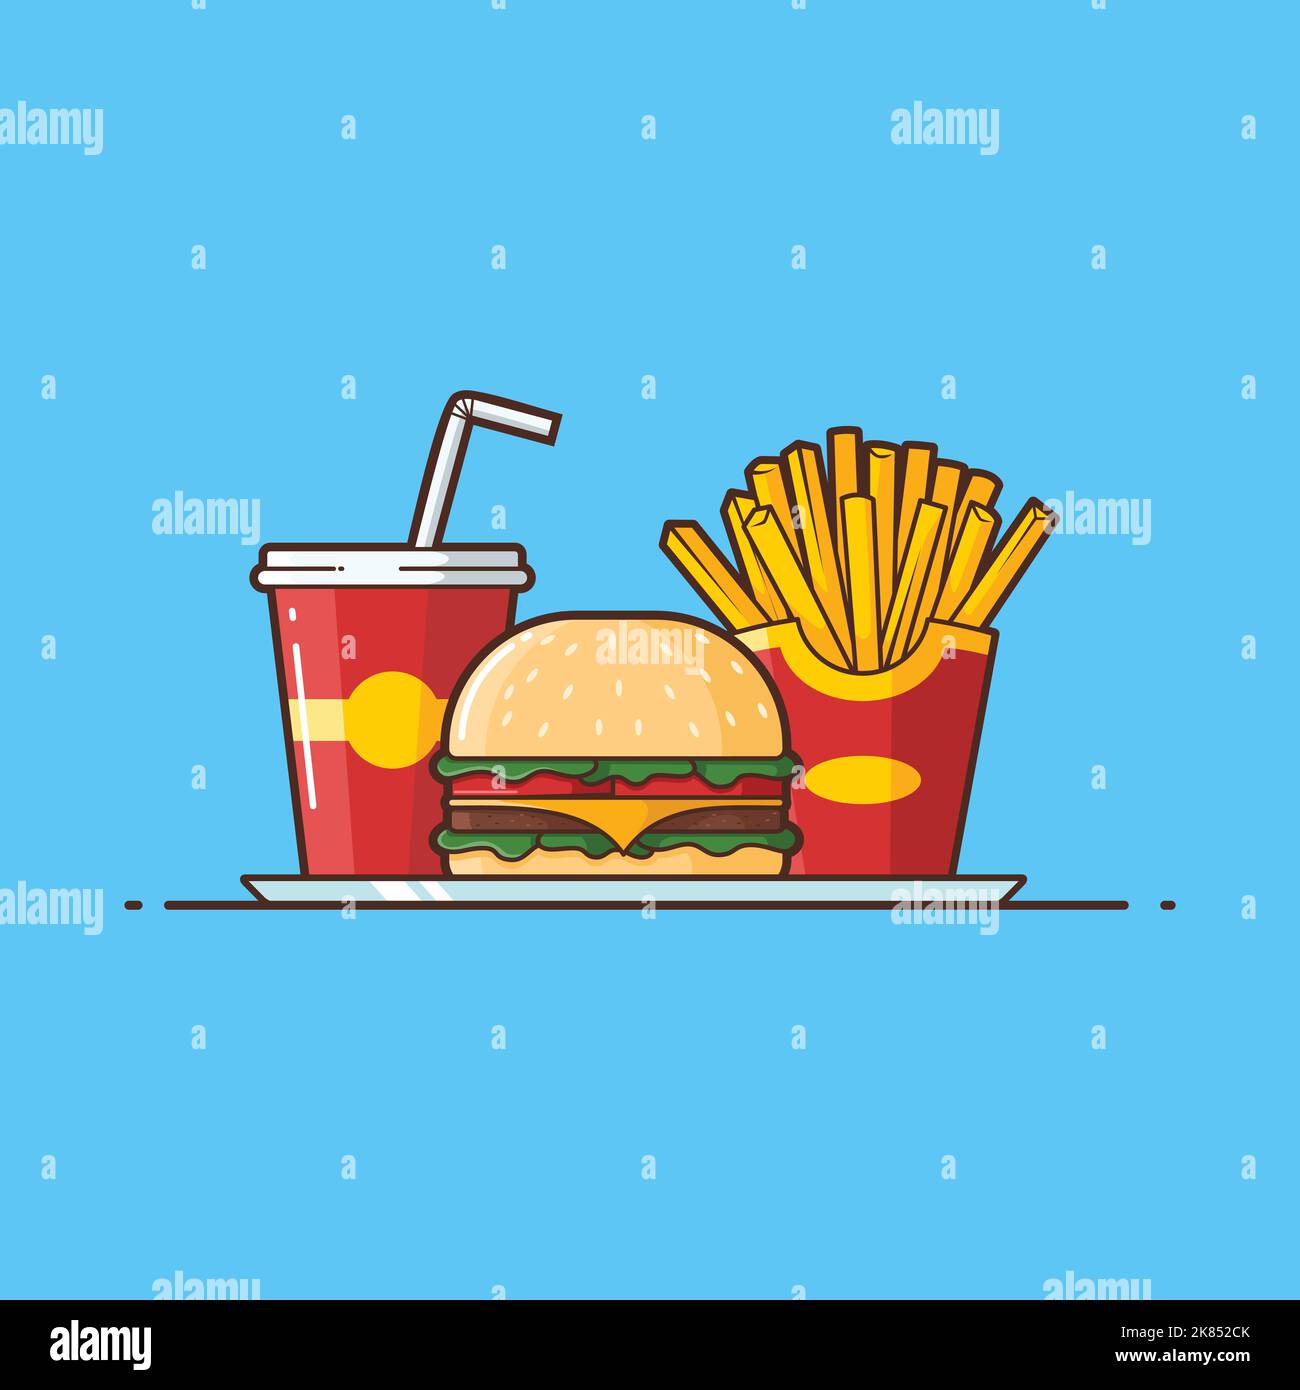 Lunch - A burger and French Fries with A cup of Soft Drink - vector cartoon illustration - Fast food, Junk Food, Lunch Illustration Stock Vector